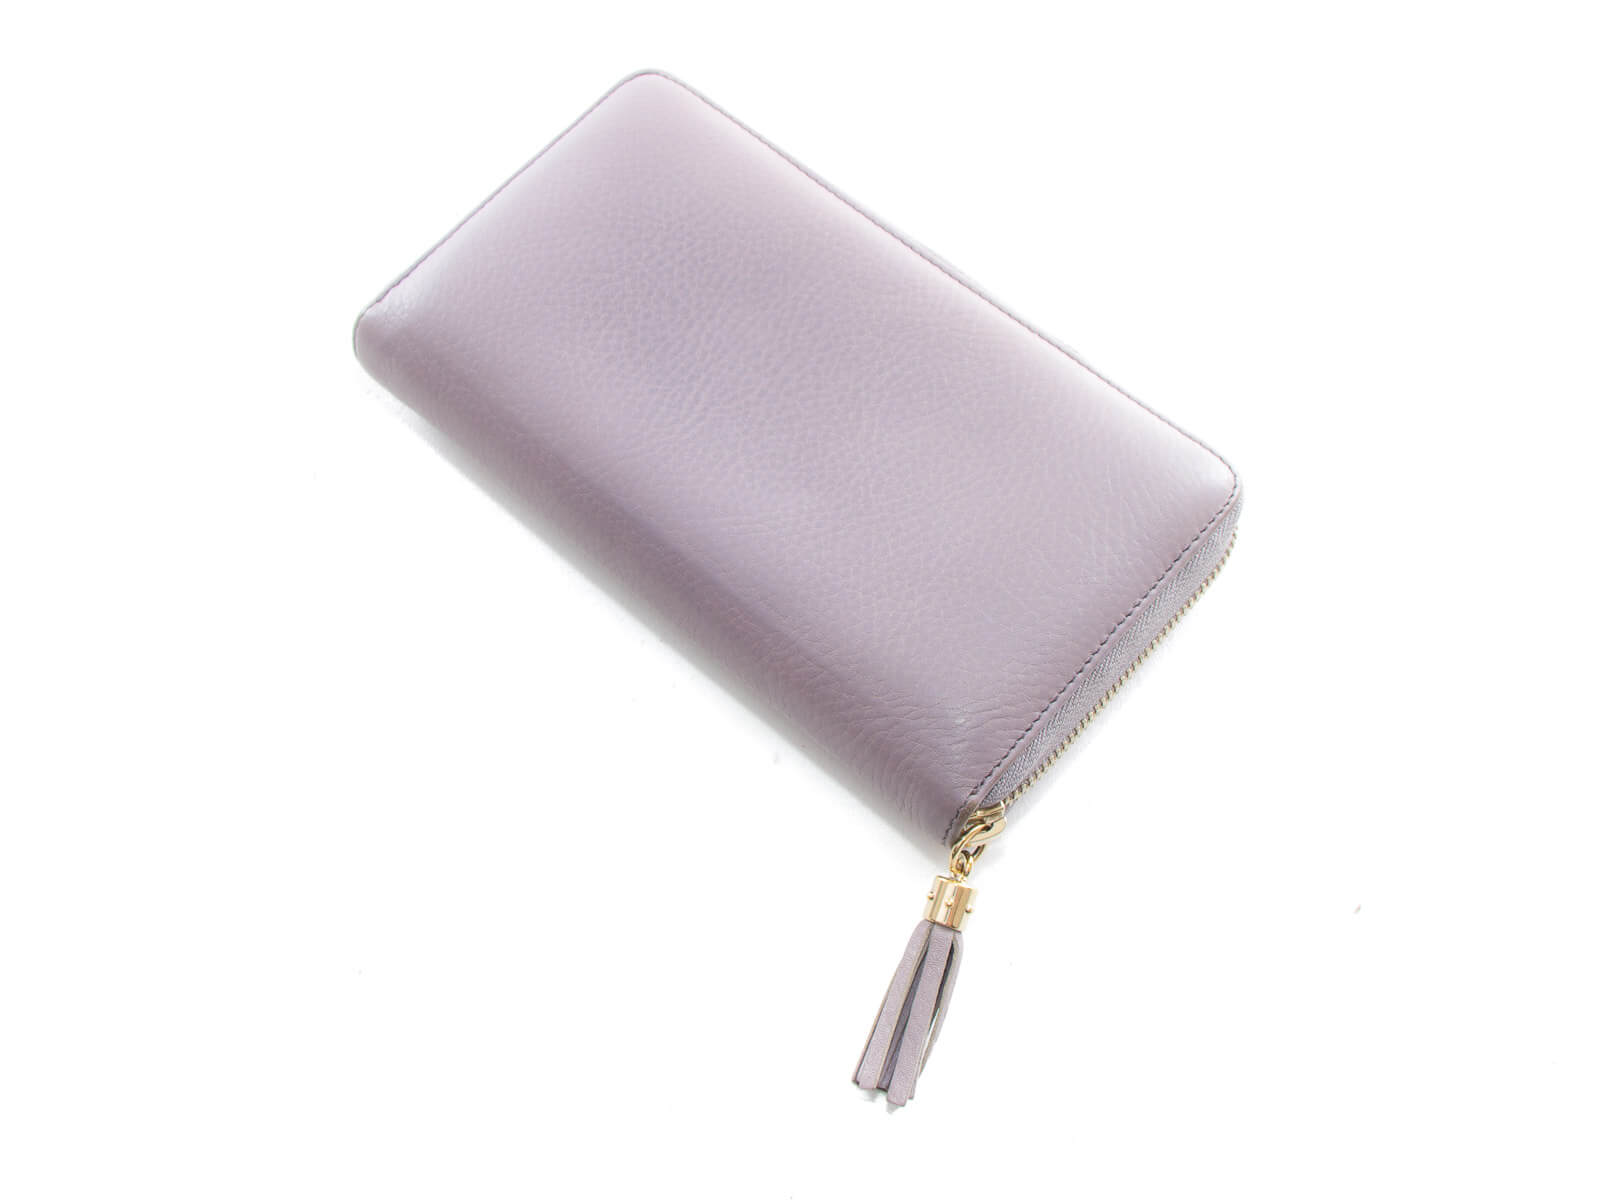 Authentic Gucci GG logo Soho lavender leather zip around wallet | Connect Japan Luxury